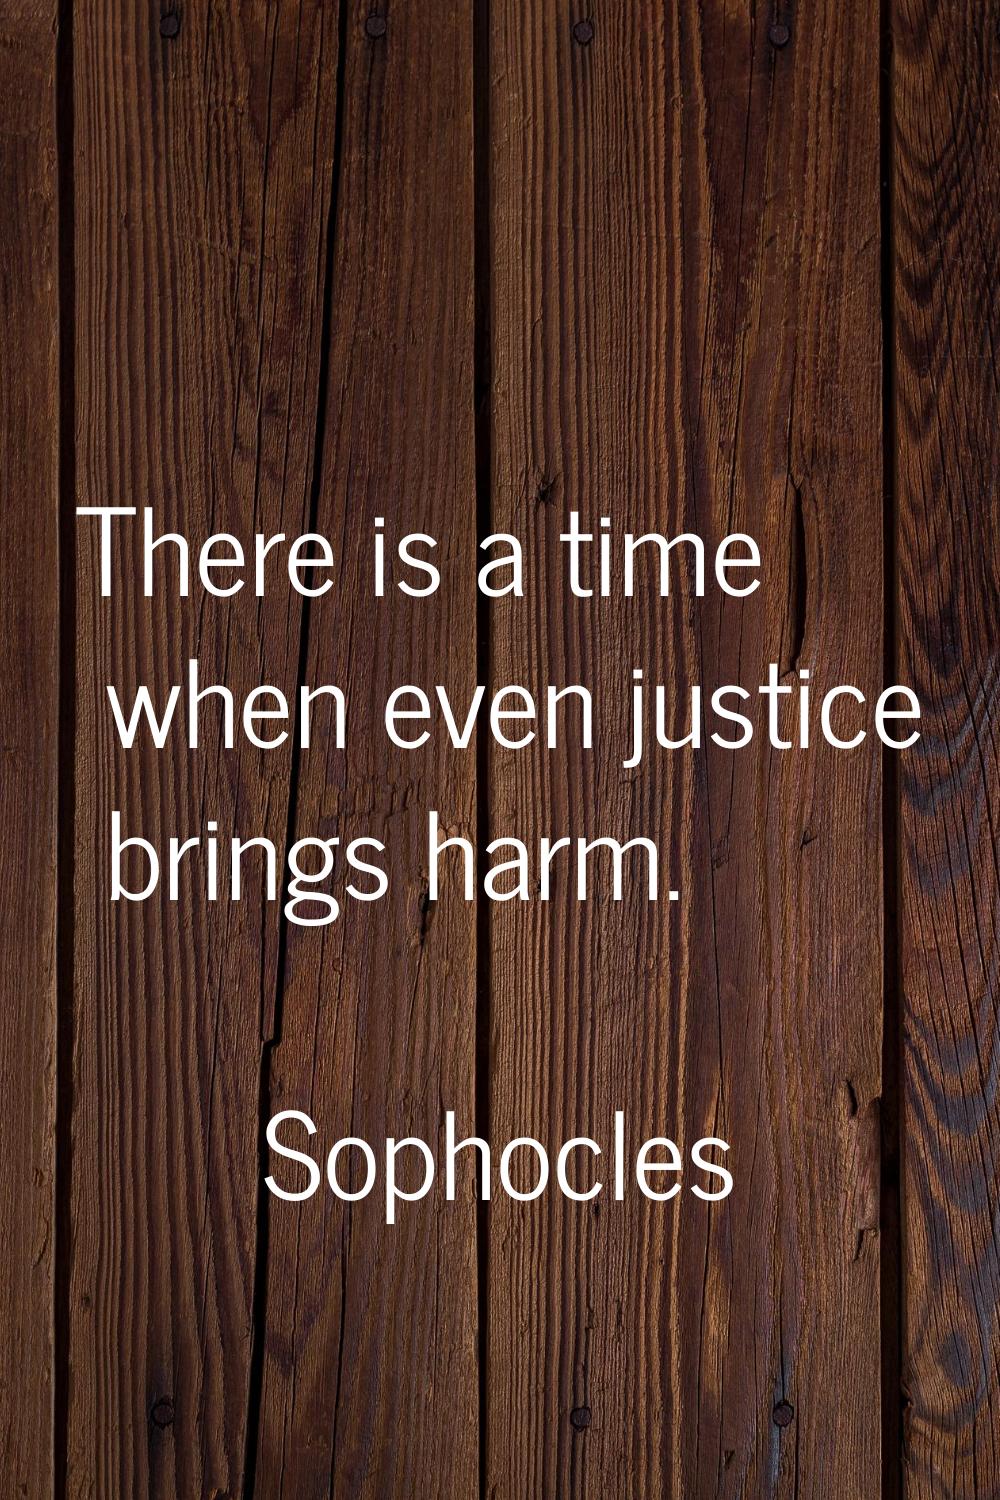 There is a time when even justice brings harm.